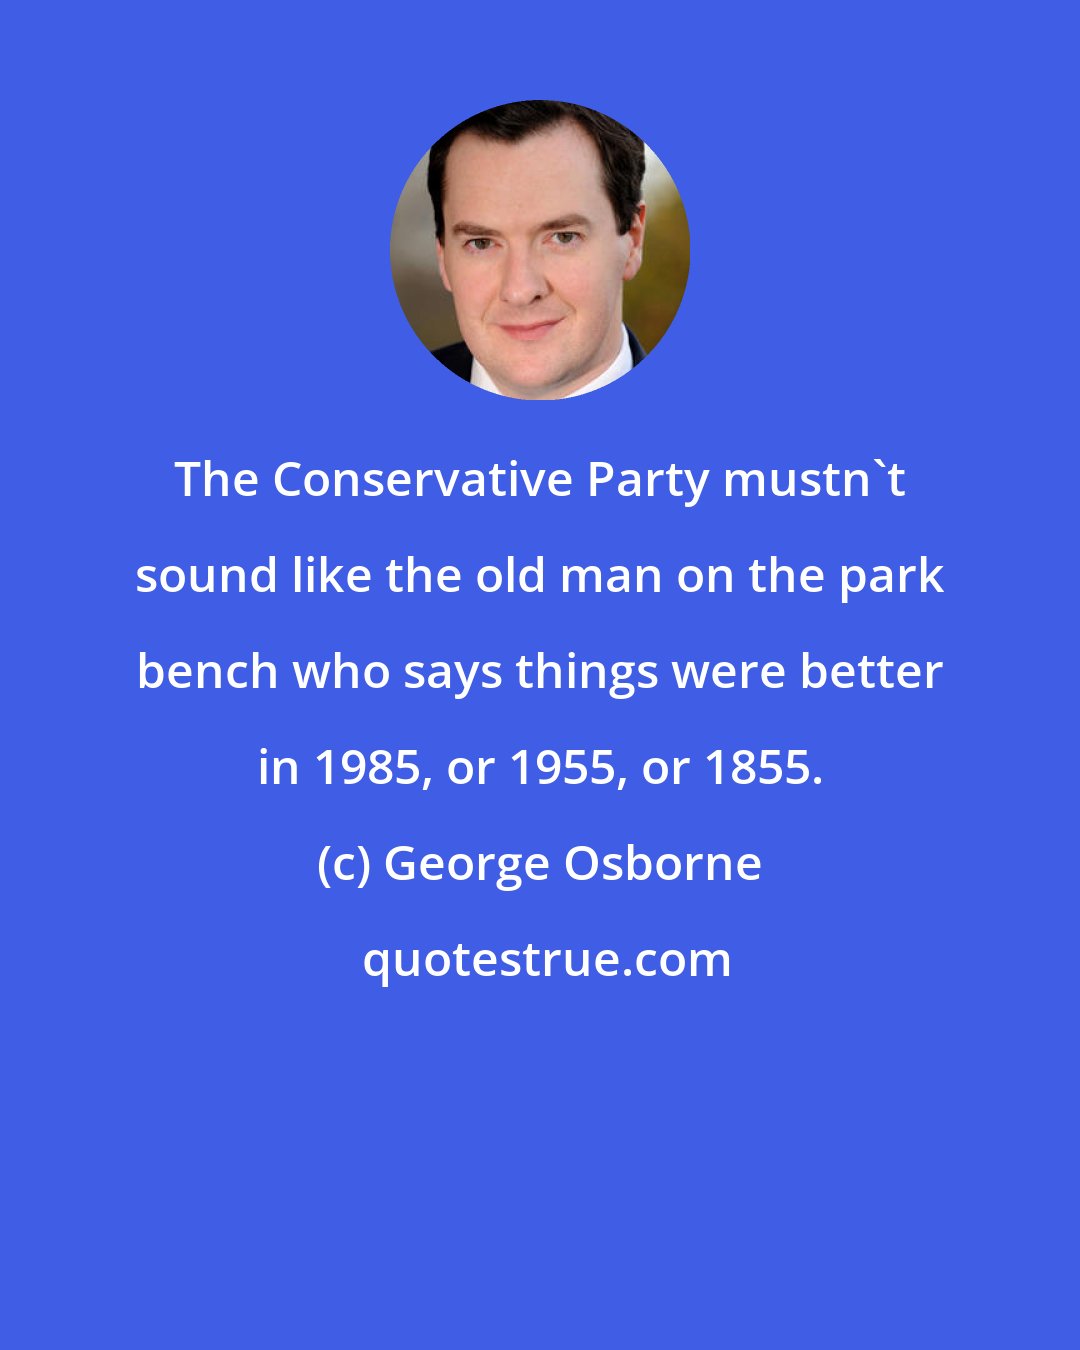 George Osborne: The Conservative Party mustn't sound like the old man on the park bench who says things were better in 1985, or 1955, or 1855.